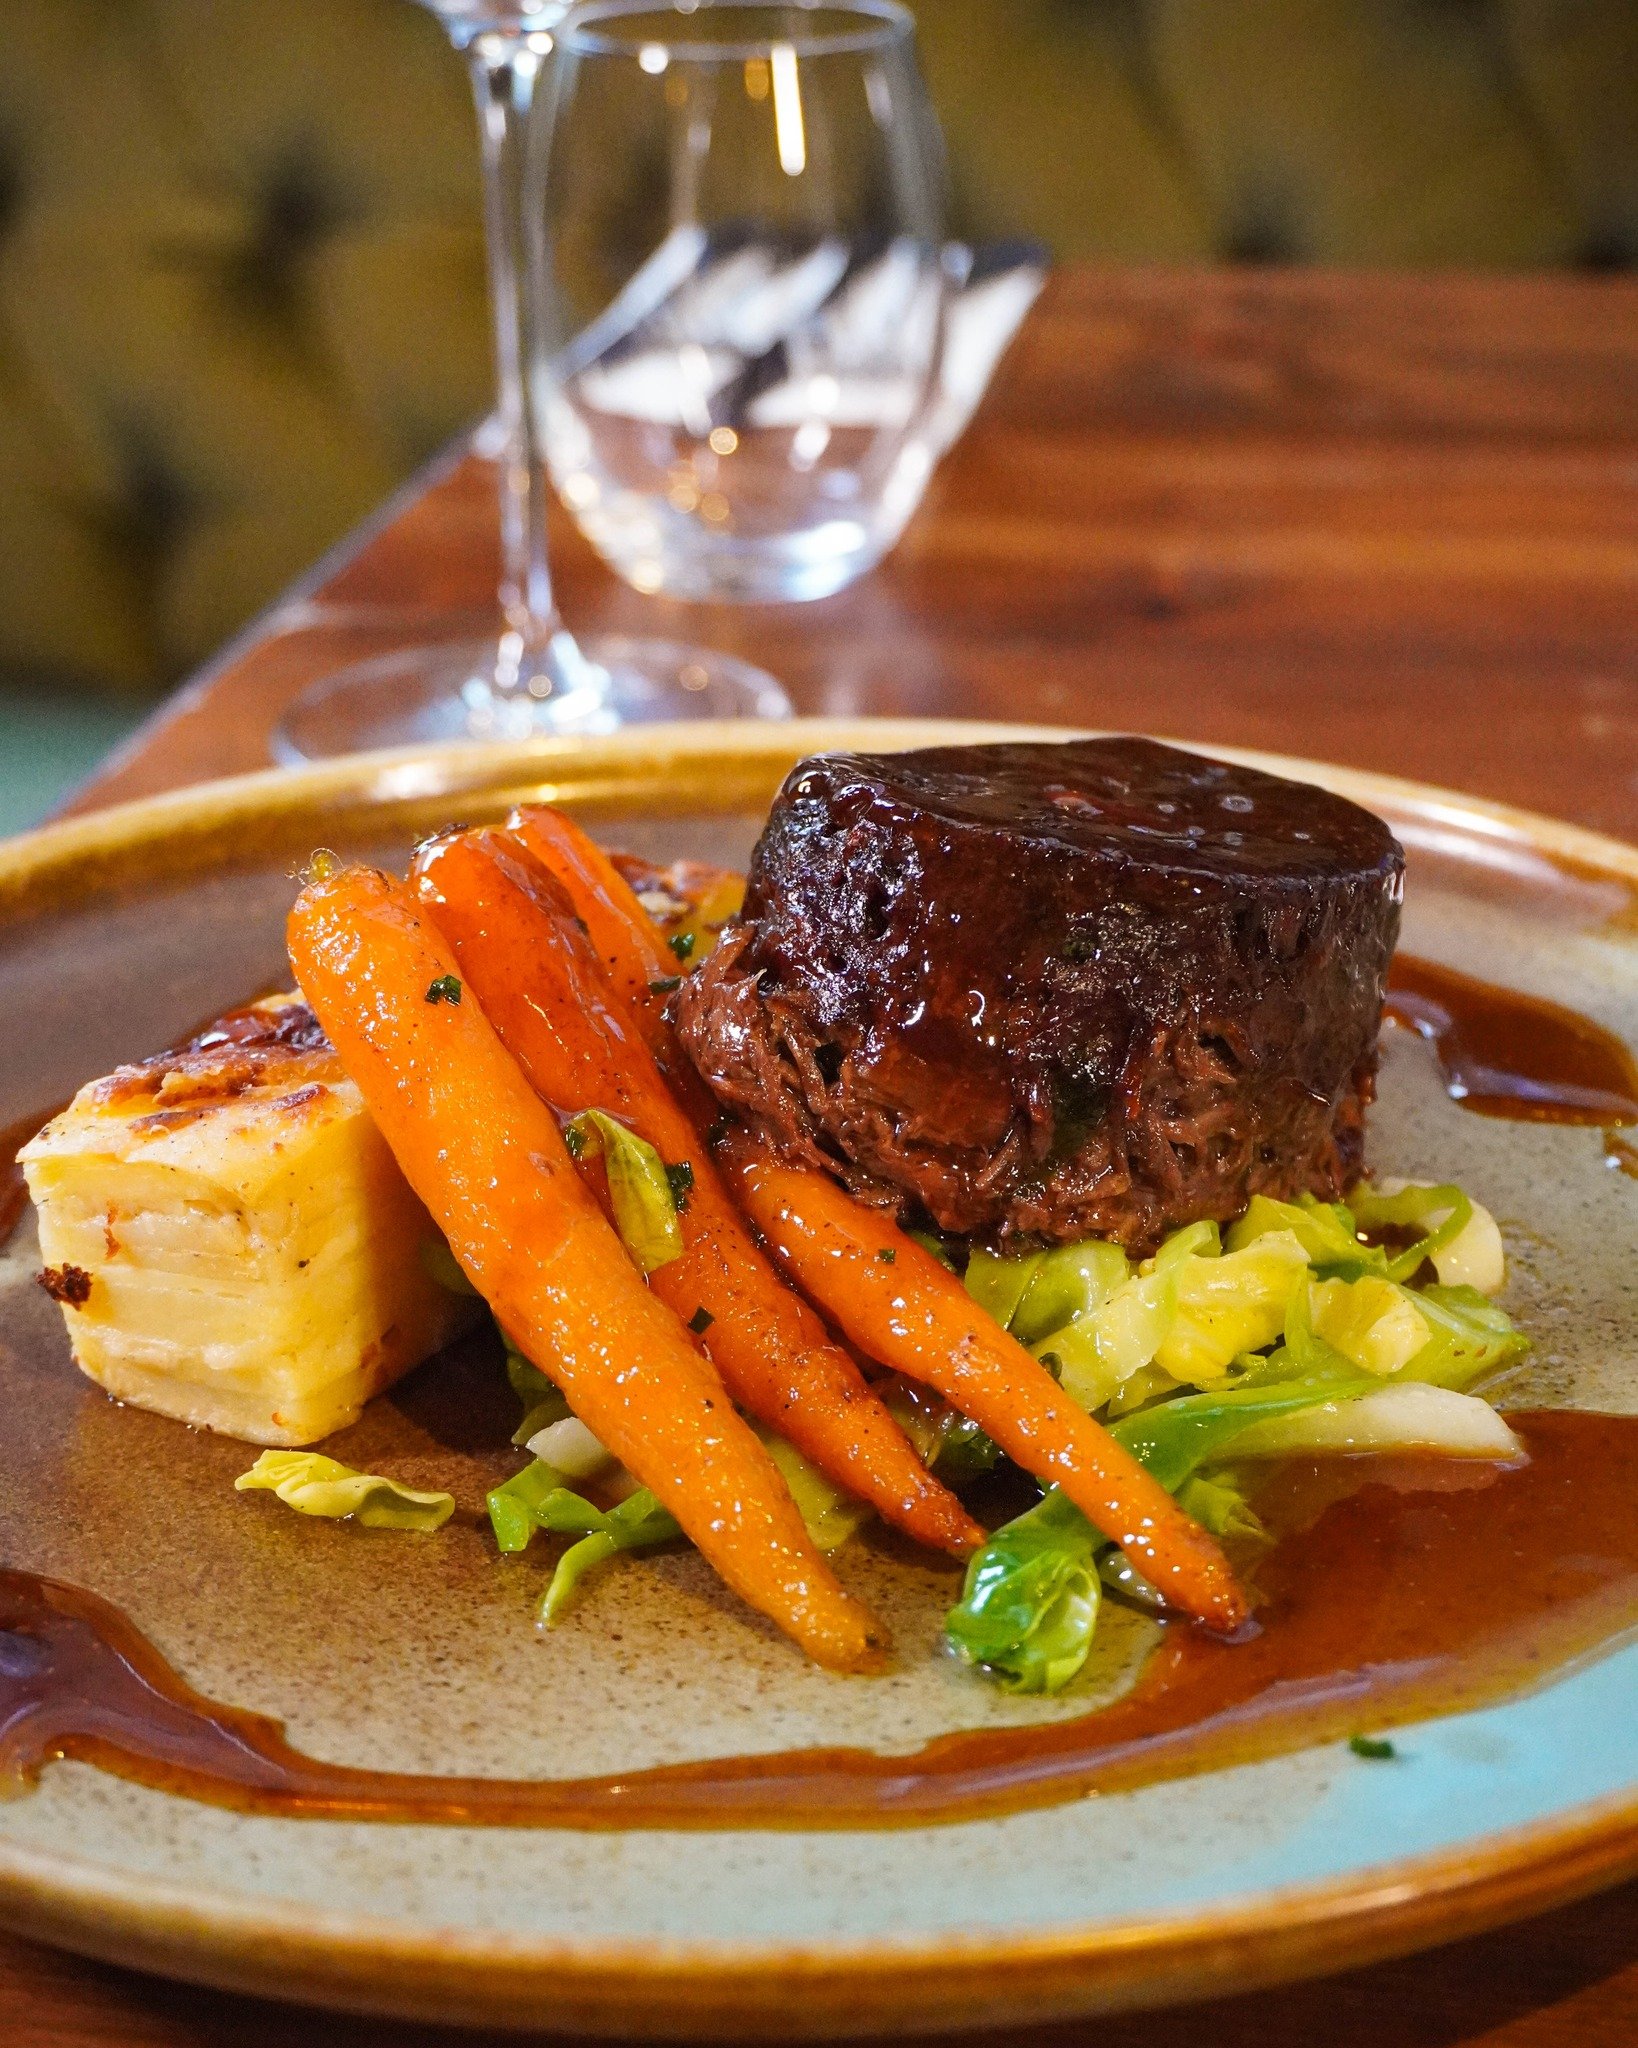 Braised Rolled Beef with Potato gratin, honey-glazed carrots, spring
cabbage and jus 😍  Just one of the delectable dishes on our Spring Menu 🌸

Book your table using the link in bio.

#newcastle #newcastlefood #newcastlefoodies #newcastlerestaurant